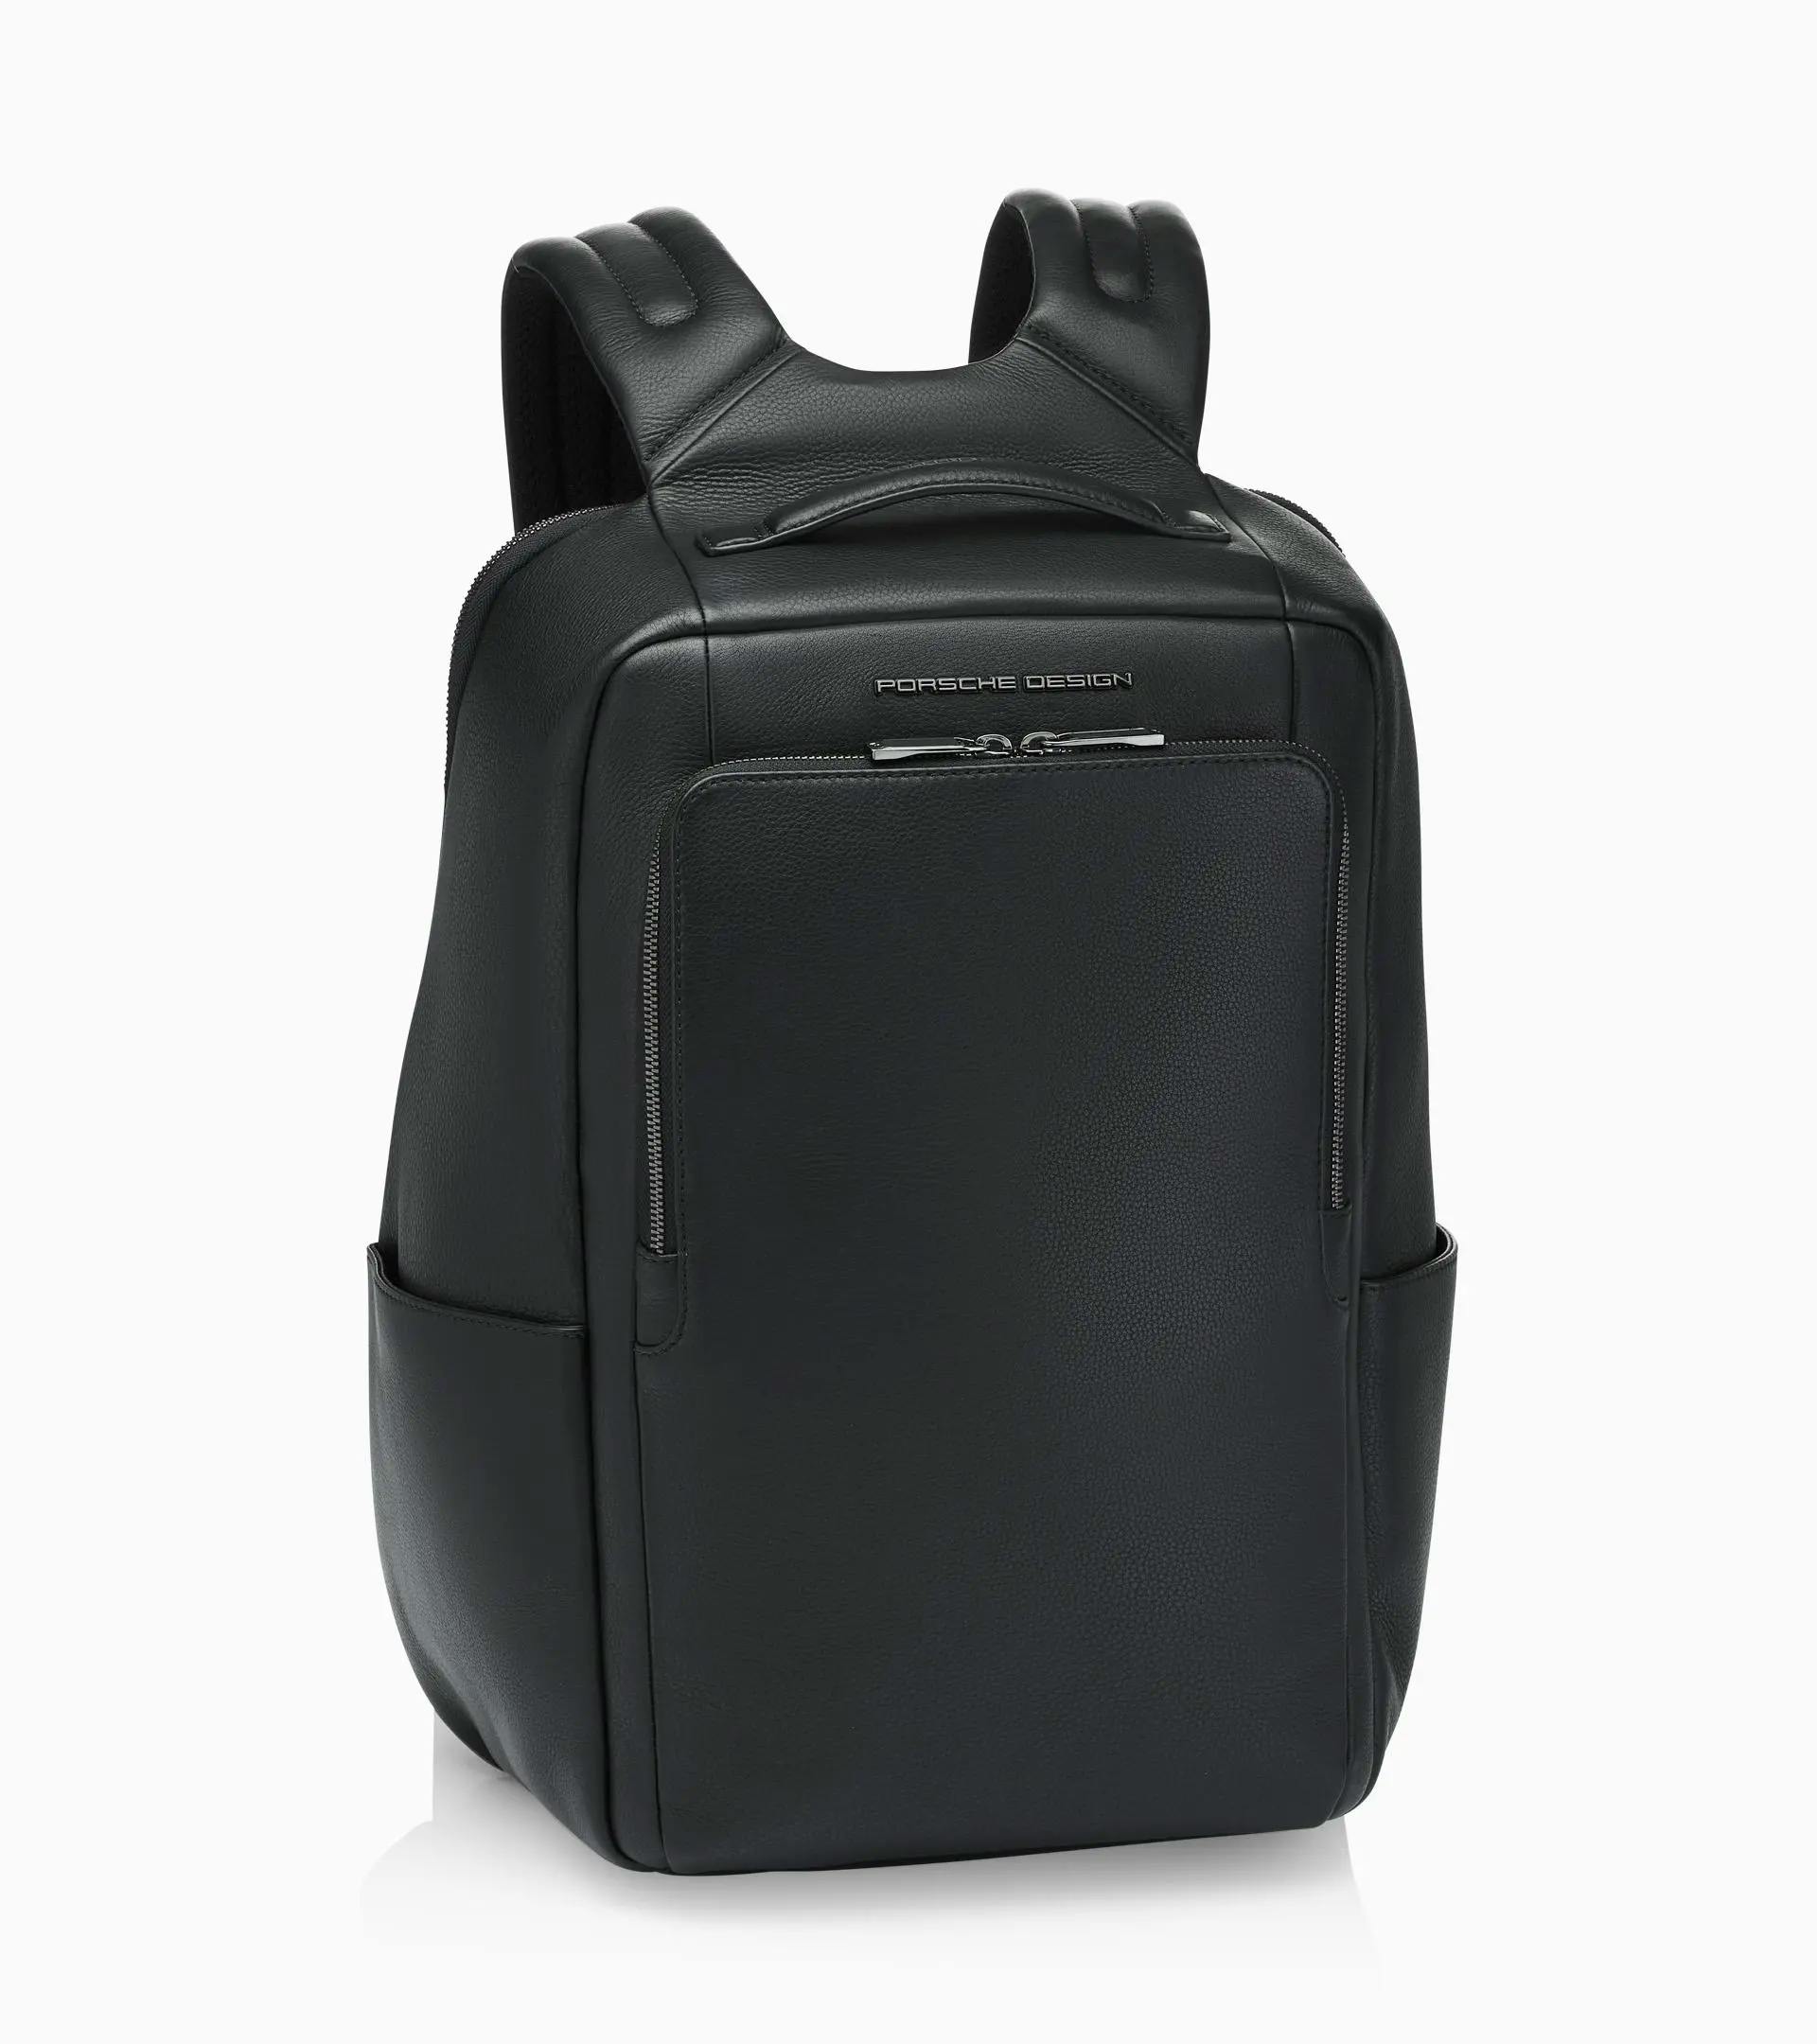 Mercedes-Benz - Looking for an elegant backpack to carry all your personal  belongings with you? Then check out this Santoni Official leather backpack.  #MercedesAMG #AMG #Santoni via Mercedes-AMG